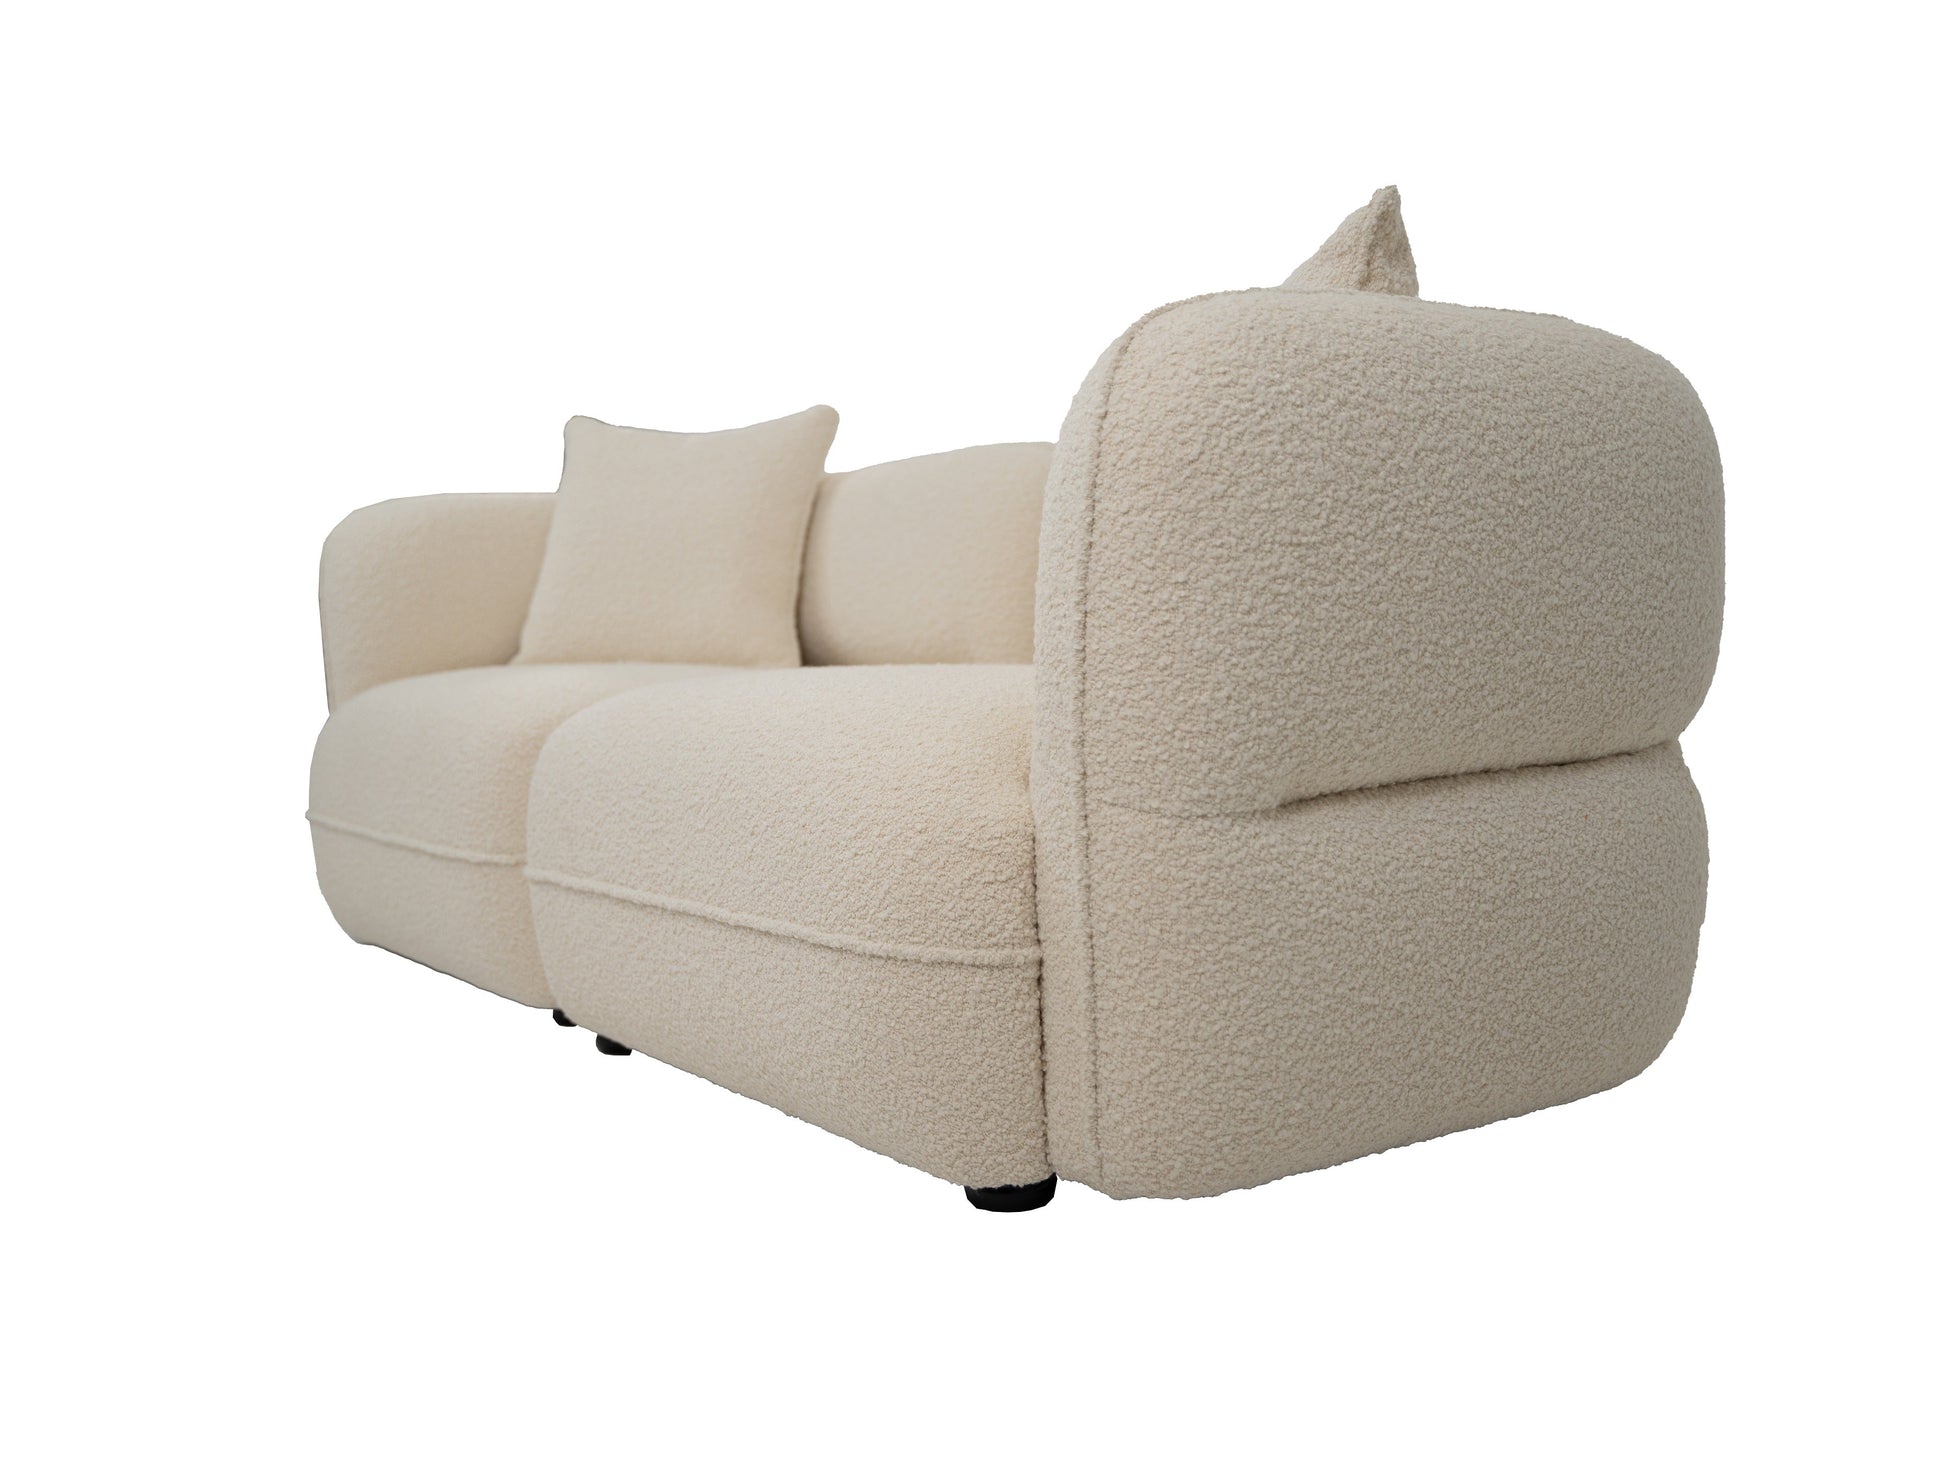 Tully Sofa: Luxurious & Comfortable 3-Seater Sofa for Your Living Space